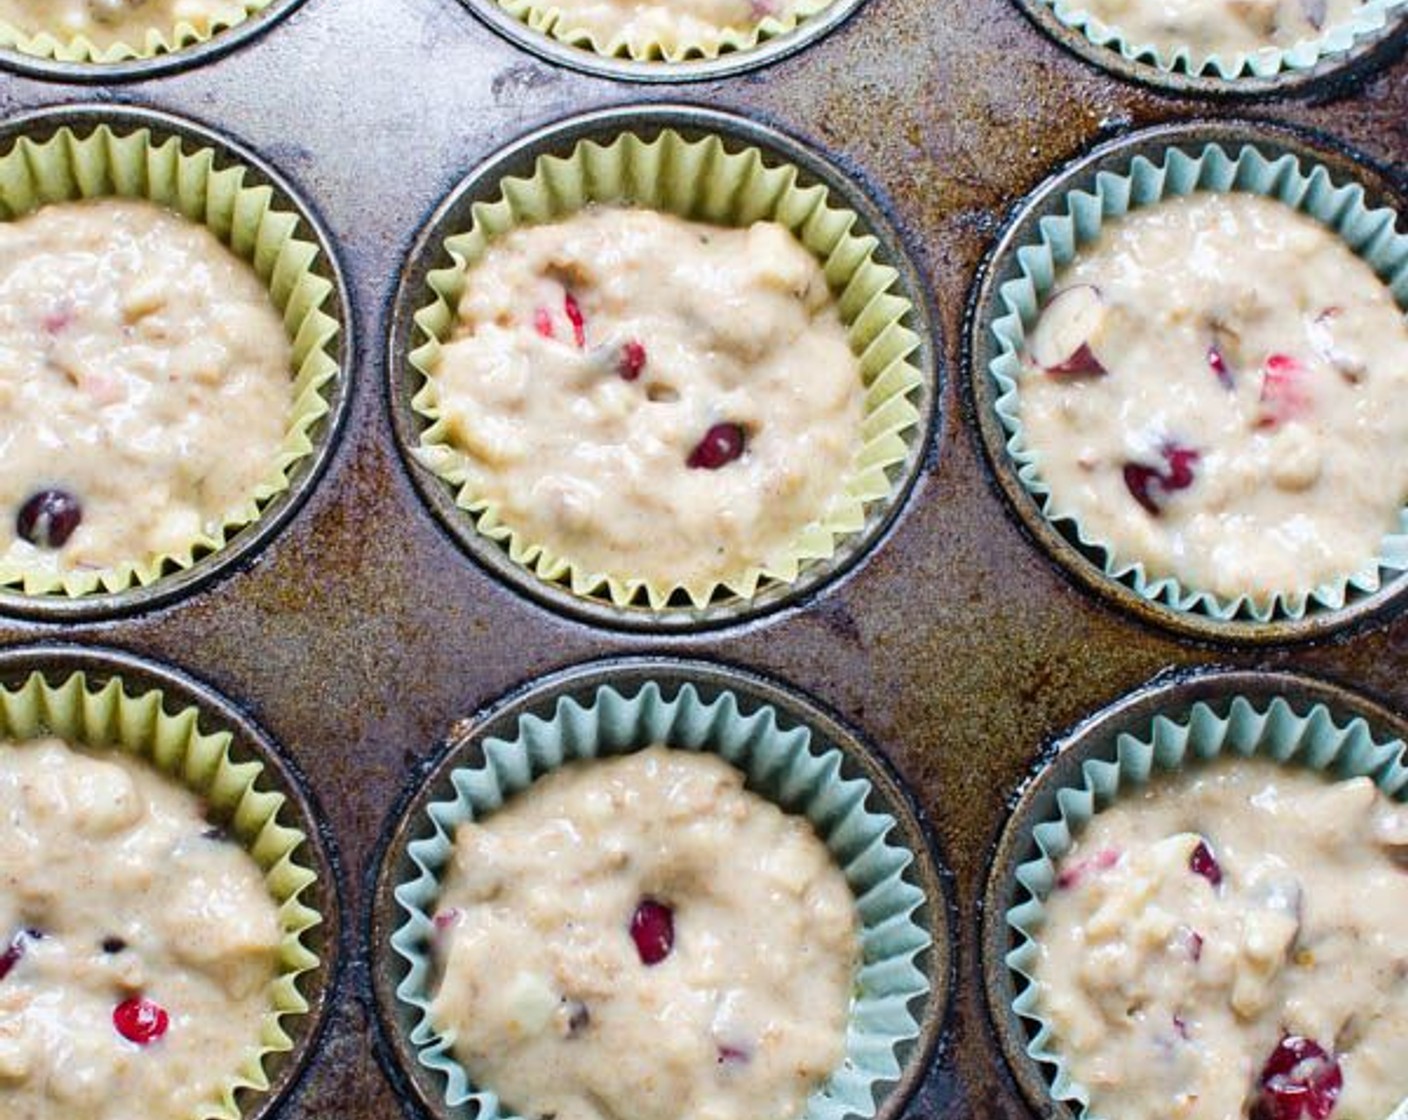 step 8 Spoon evenly into muffin tins and bake.  For regular sized muffins - bake 20-25 minutes.  For mini muffins, bake 12-15 minutes or until a cake tester comes out clean.